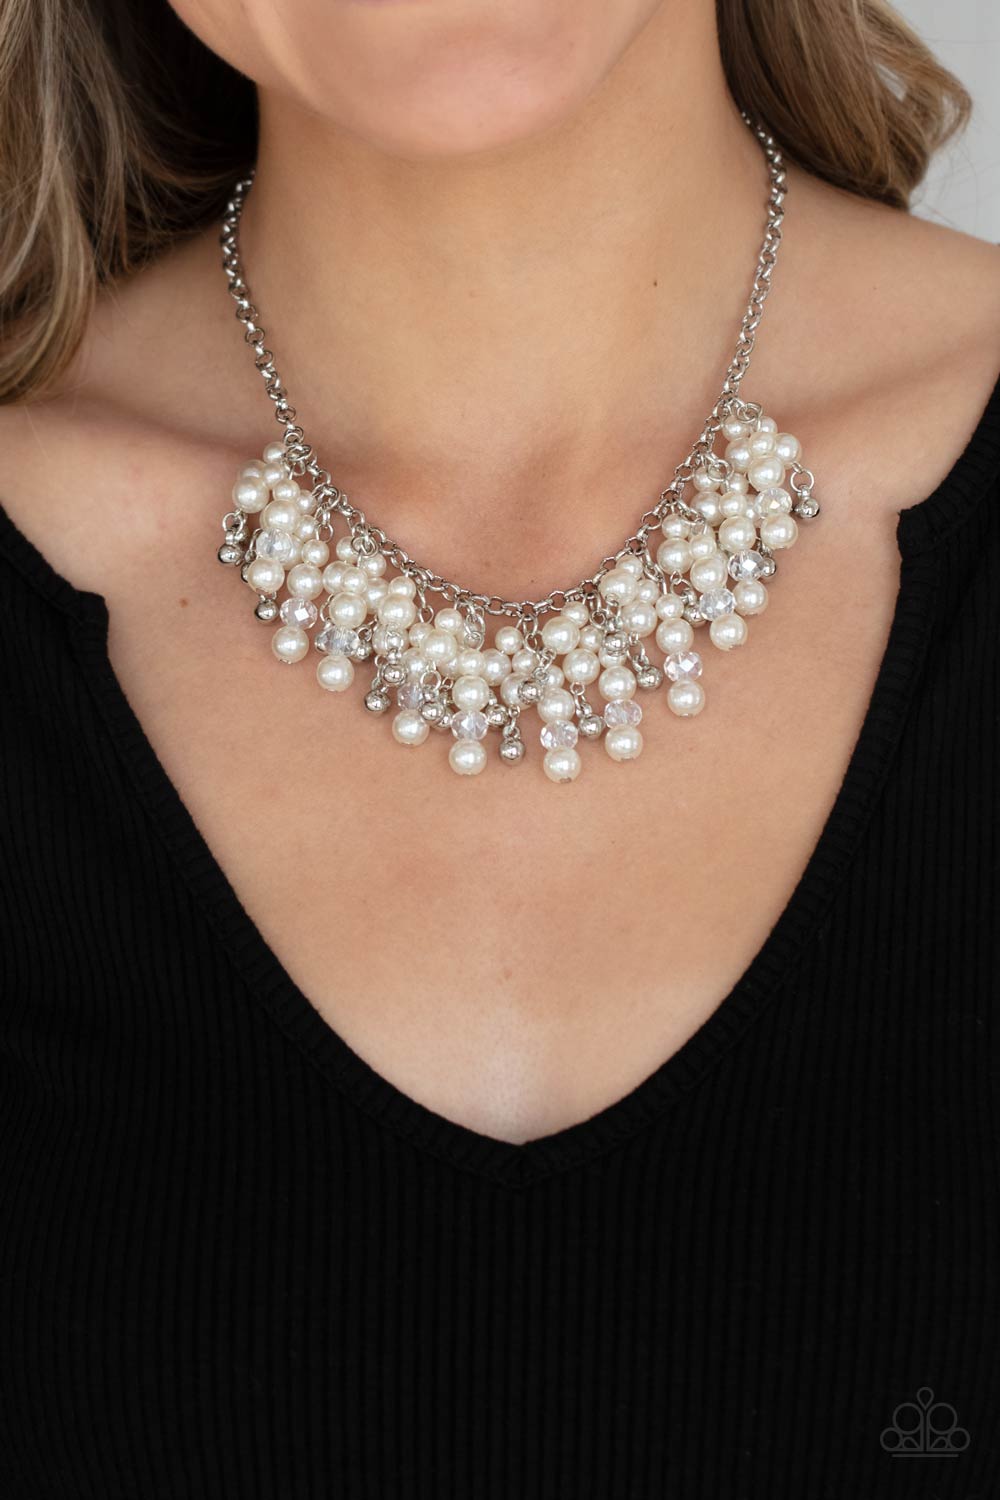 Champagne Dreams White Pearl Necklace - Paparazzi Accessories-on model - CarasShop.com - $5 Jewelry by Cara Jewels